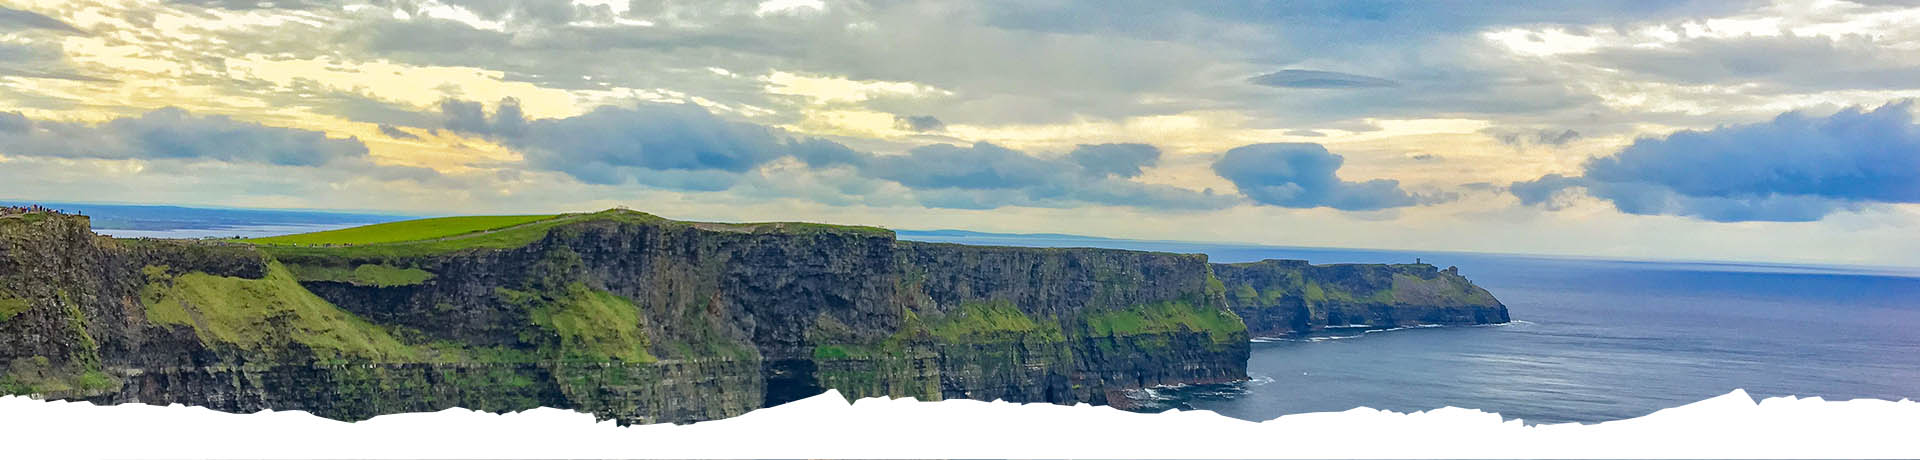 landscape image of cliffs and sea in Ireland